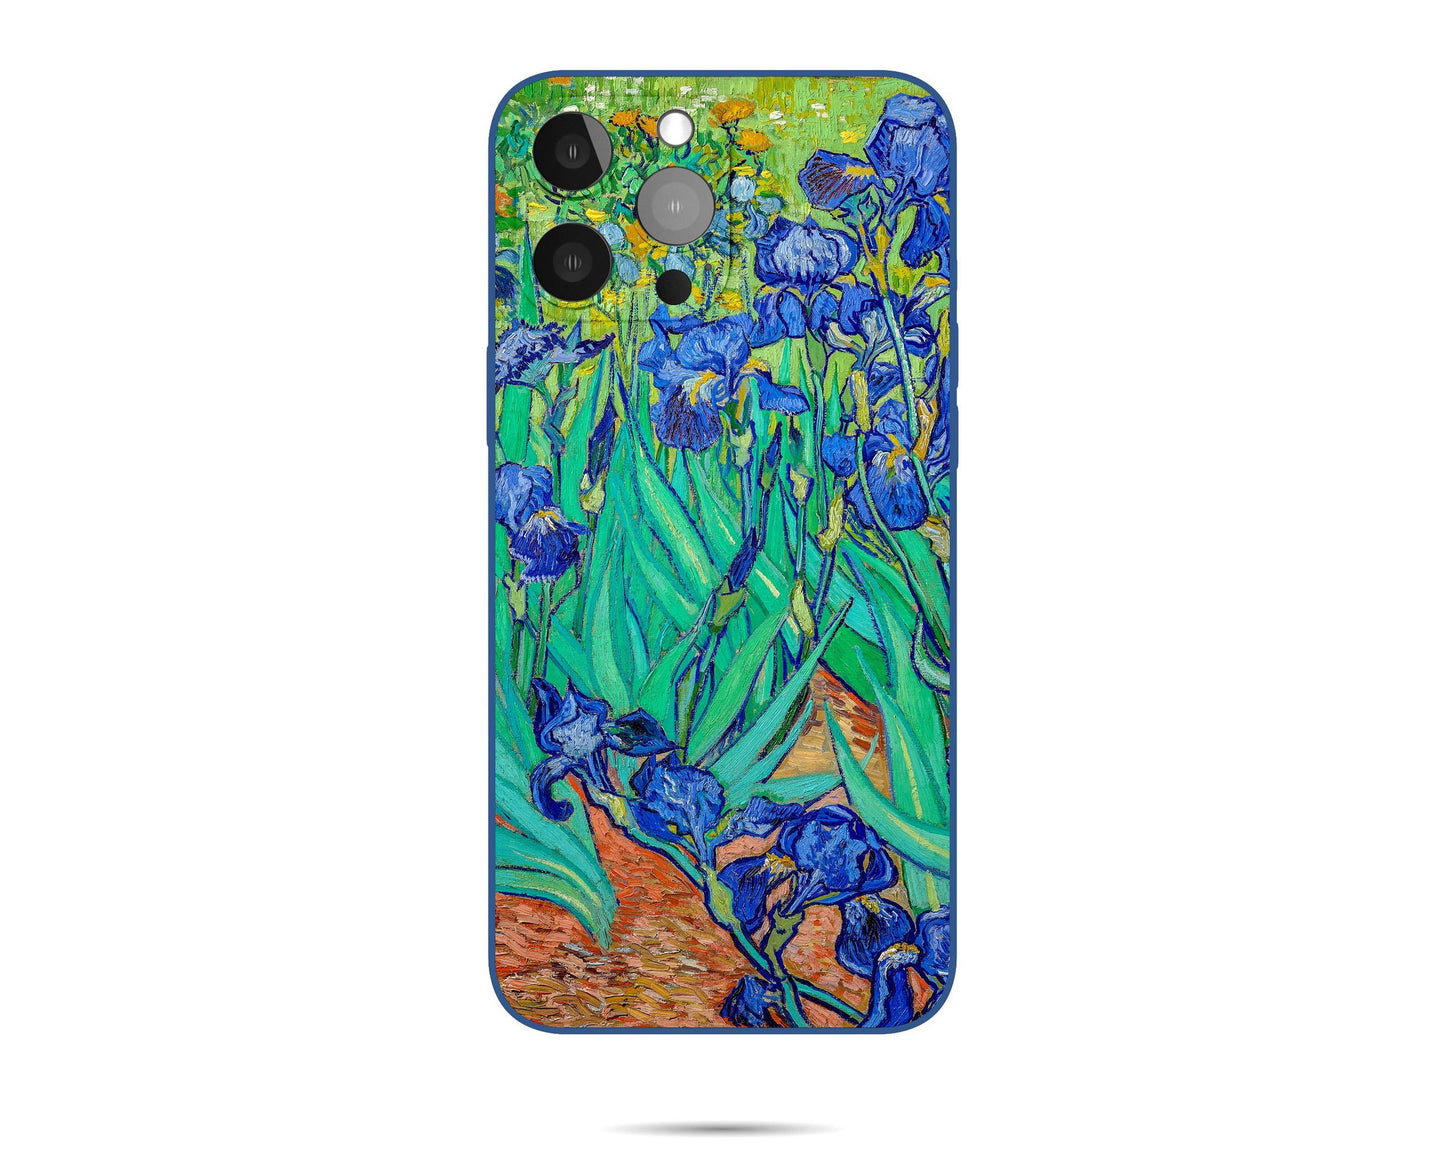 Vincent Van Gogh Irises Phone Cover, Iphone 14 Pro Max Case, Iphone 7 Plus, Iphone 8 Plus Case Art, Birthday Gift, Iphone Case Silicone